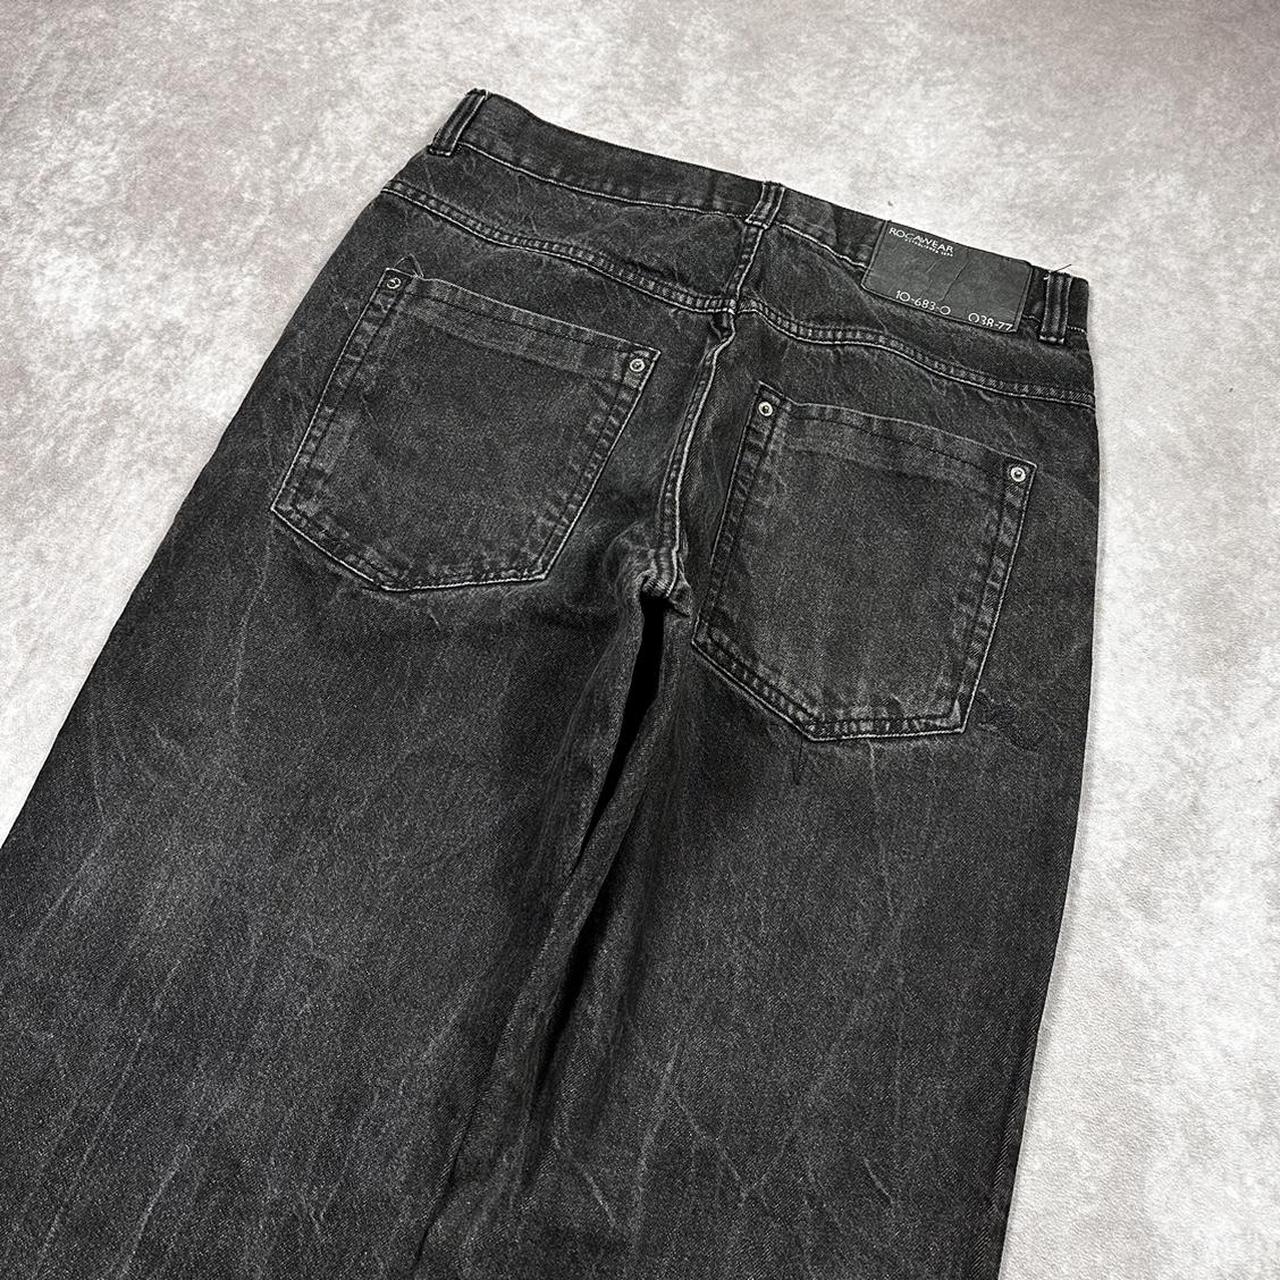 Y2K Baggy Rocawear Jeans THESE ARE SOOO HARD... - Depop